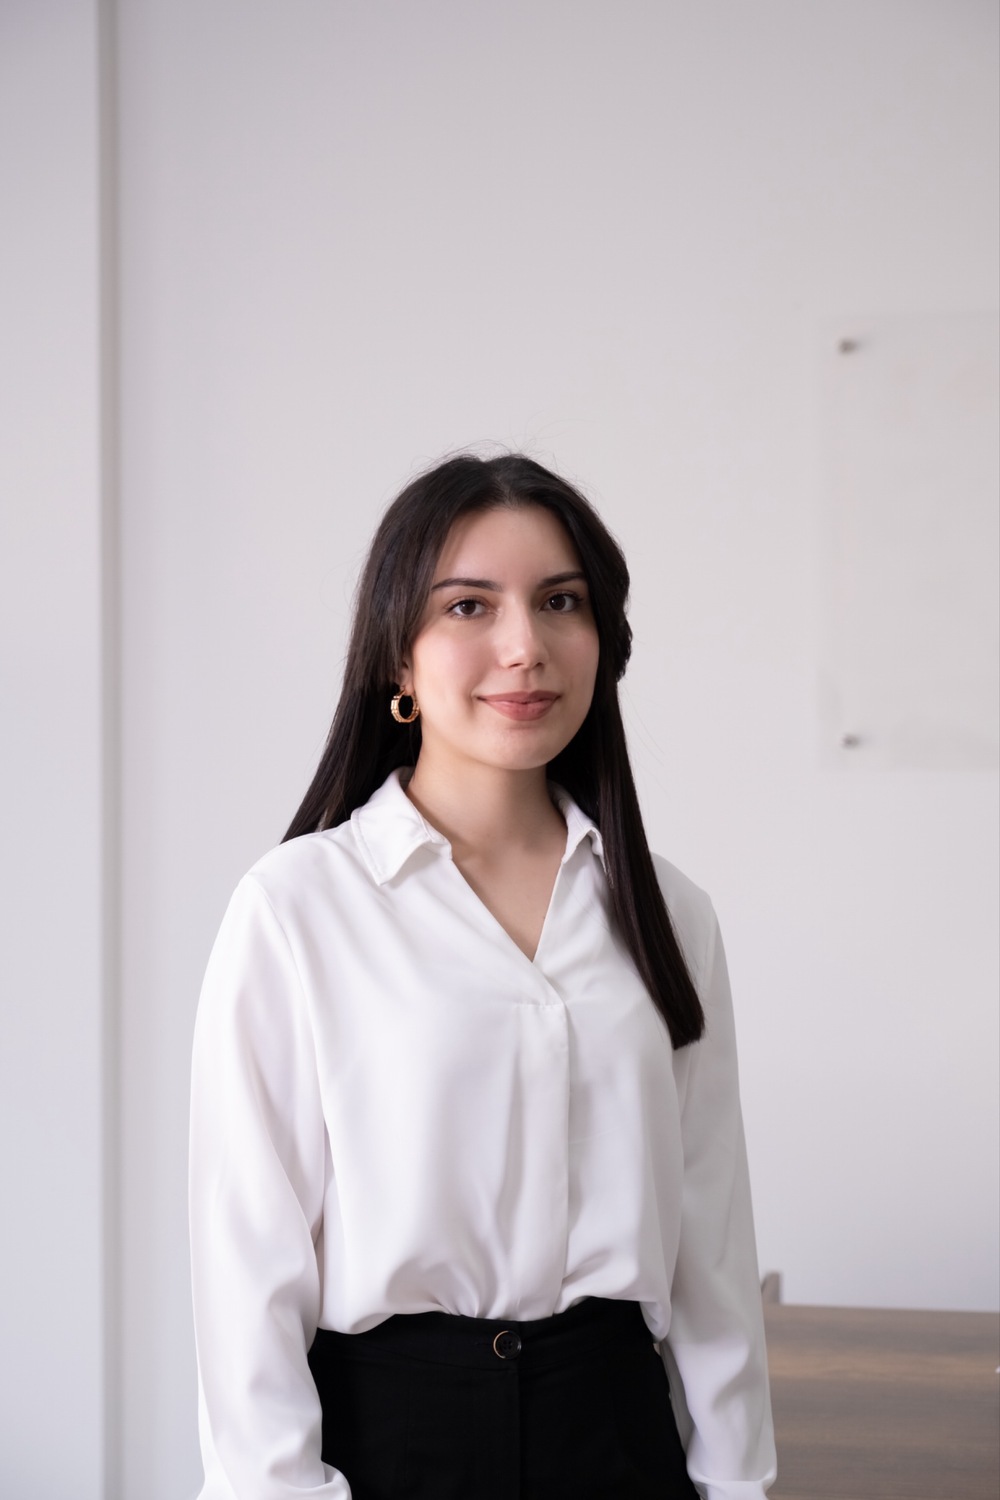 Fatima Eyyub, expert in tax, financial, technology, contract, and commercial law. Provides comprehensive legal advice, currently pursuing studies at the University of Arizona. Fluent in Azerbaijani, English, Russian, Turkish.